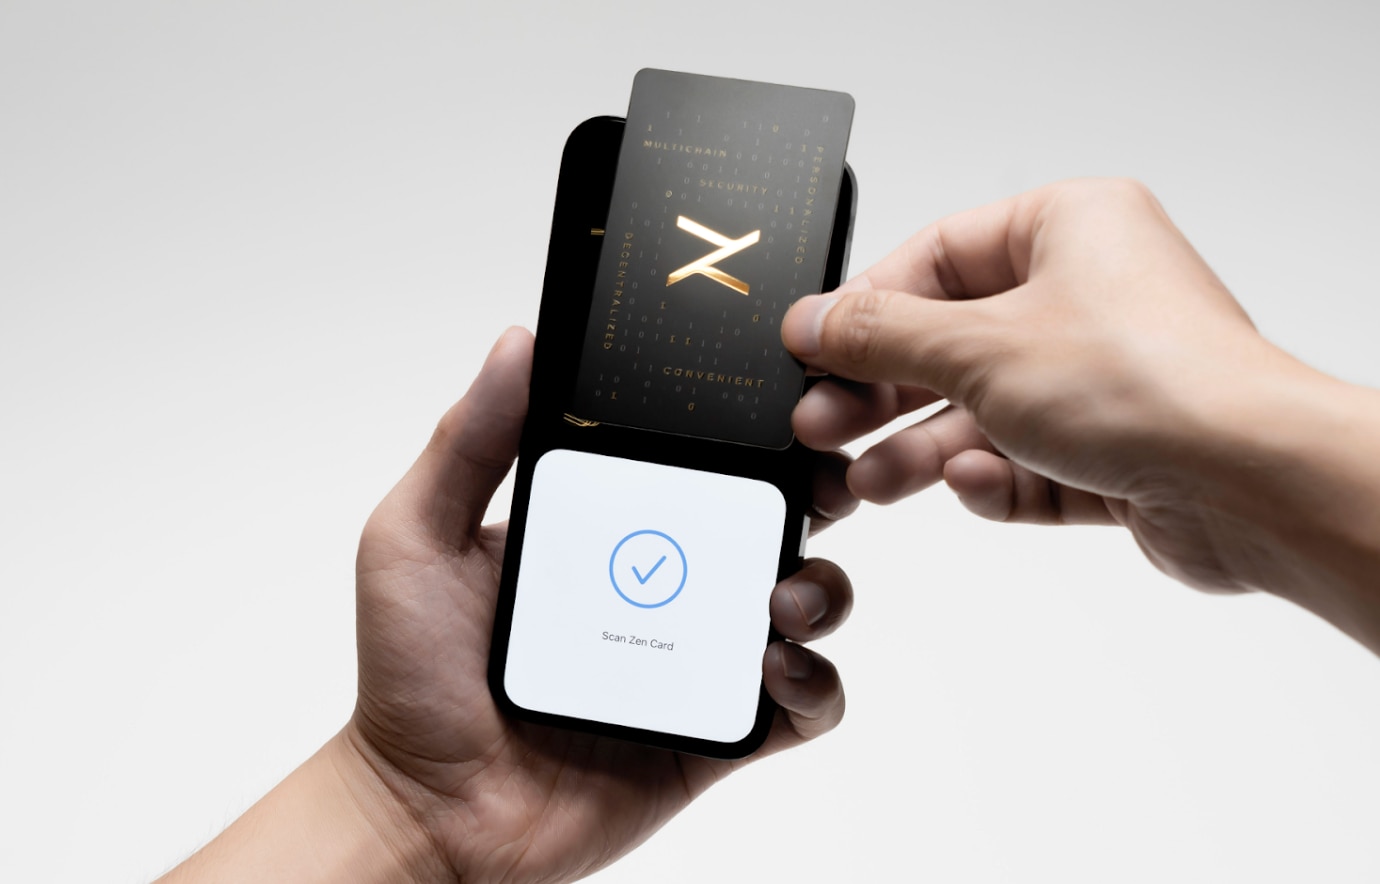 Users scan Zen Card on their phone to sign transactions